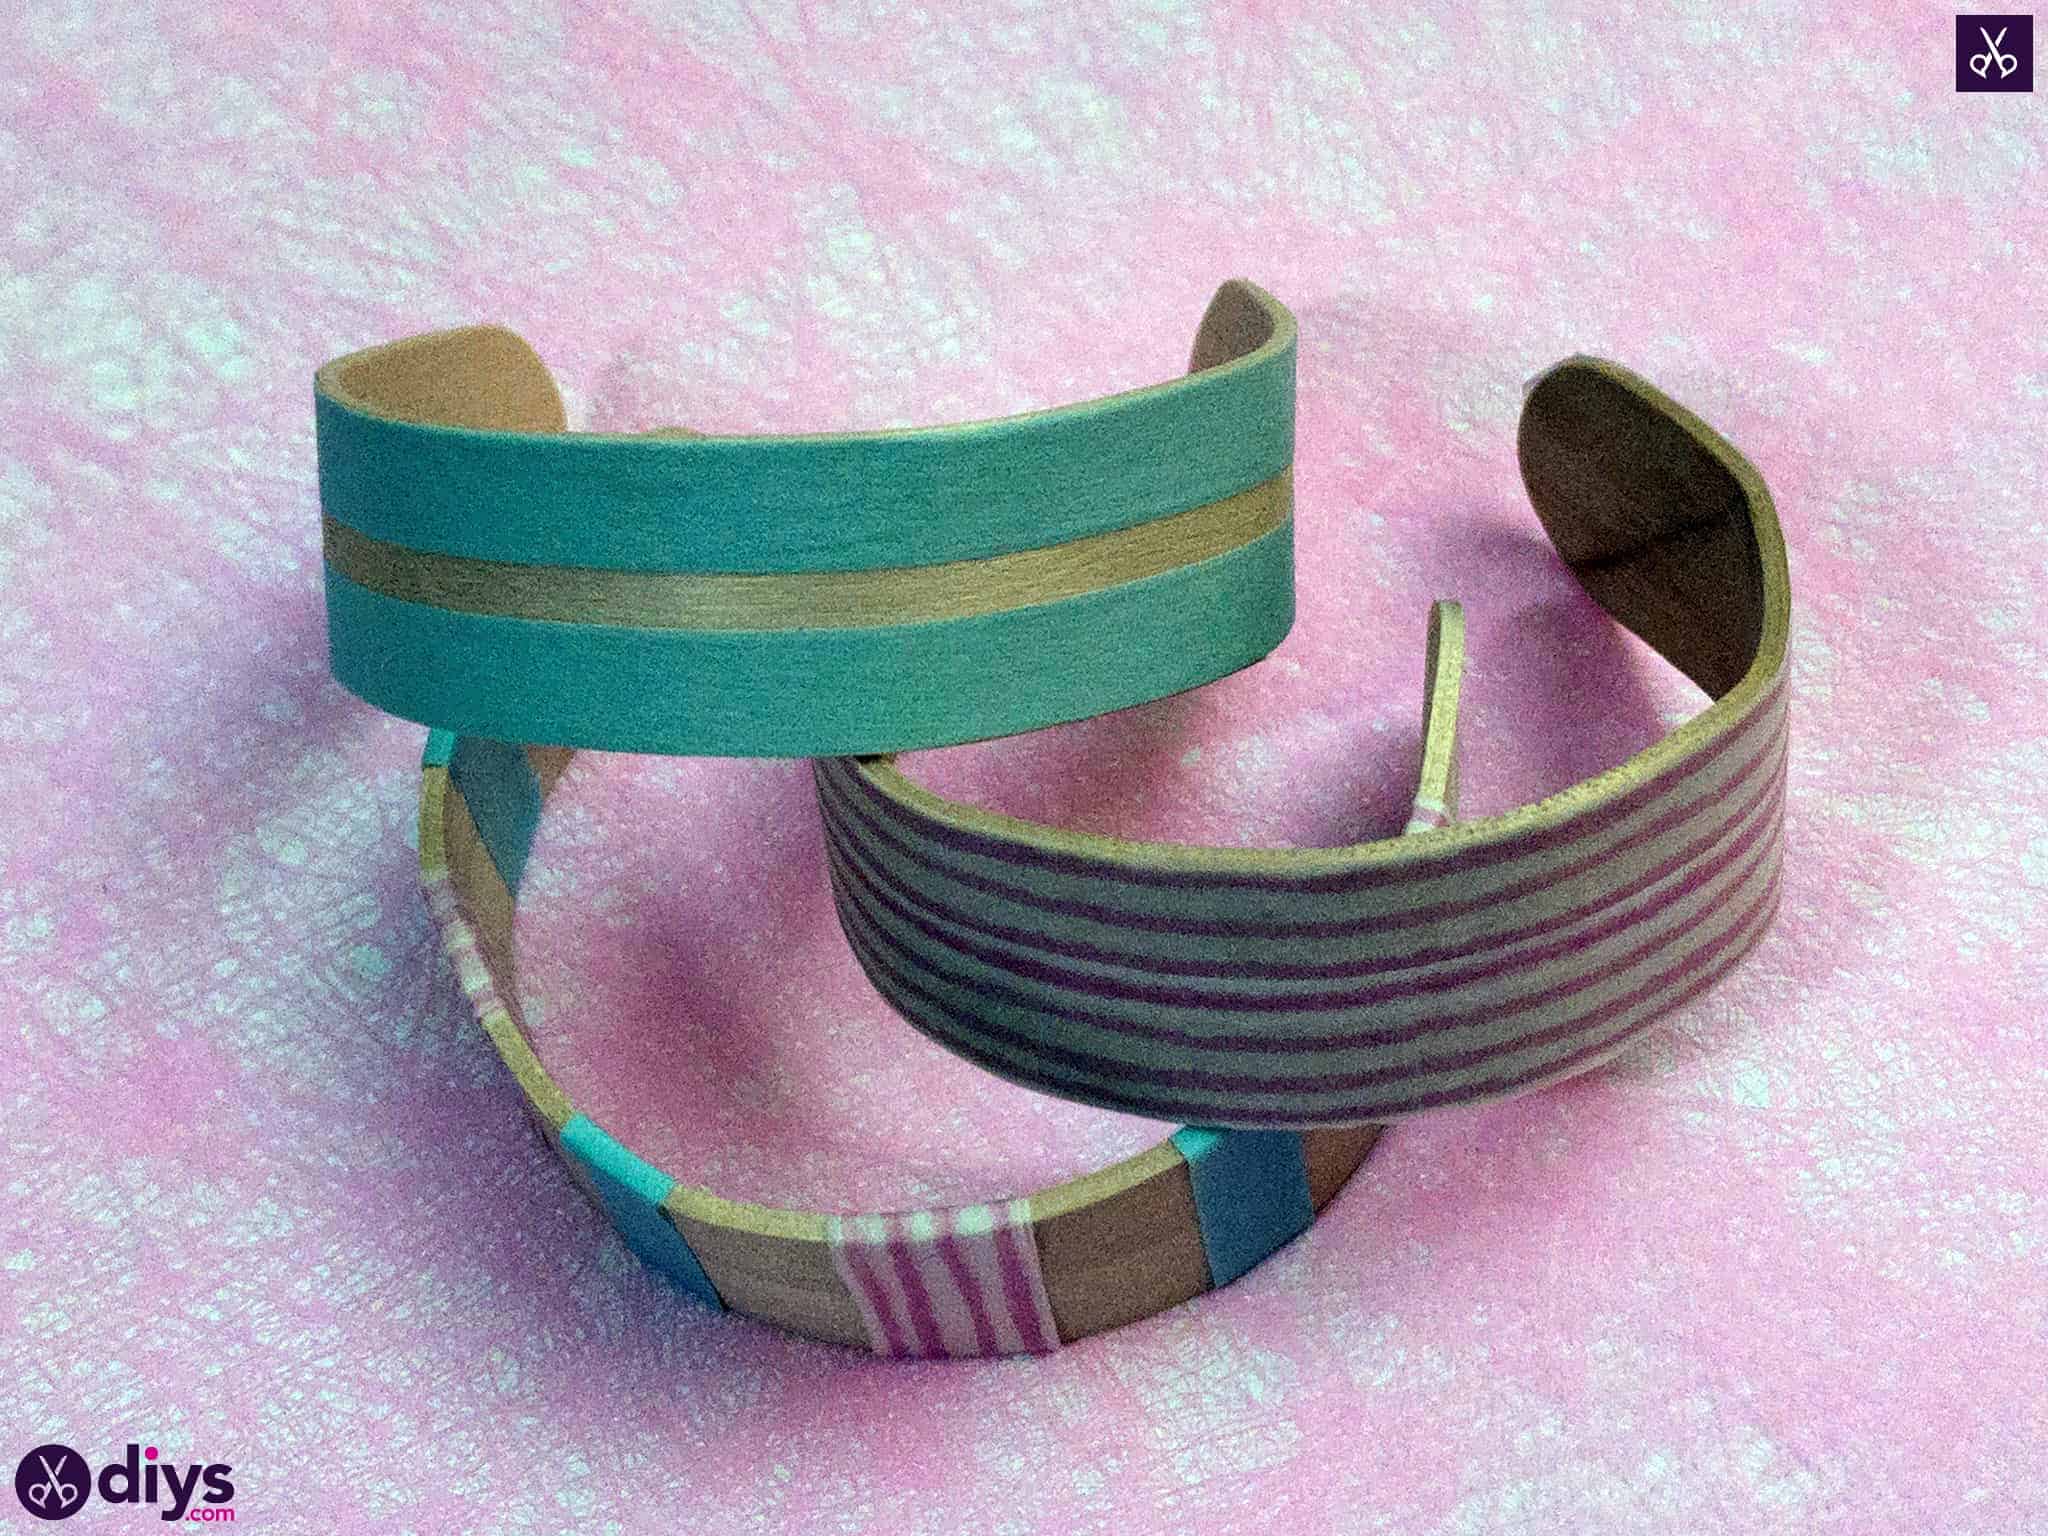 How to make a popsicle stick bracelet for girls